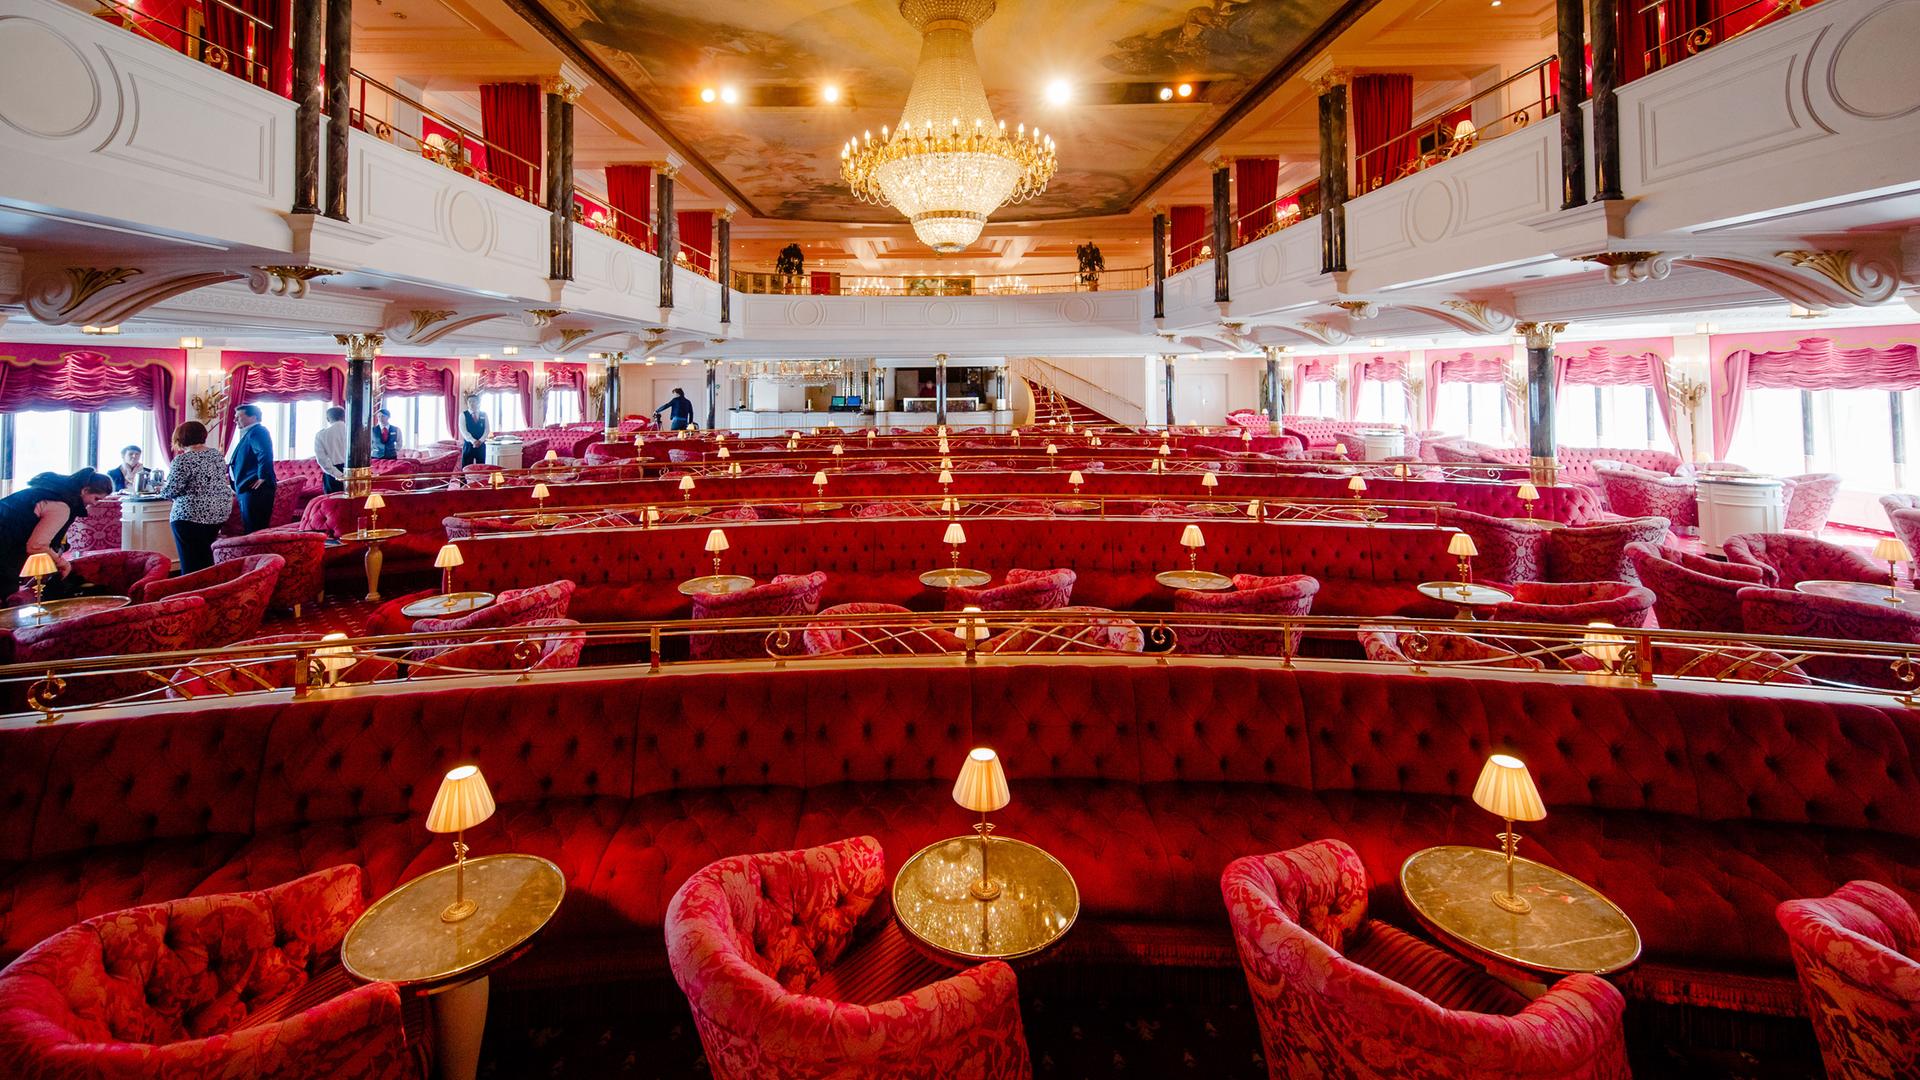 in Kaisersaal "MS Germany" Armchairs and benches covered in red velvet stand around the small tables.  A large chandelier hangs in the center of the hall.